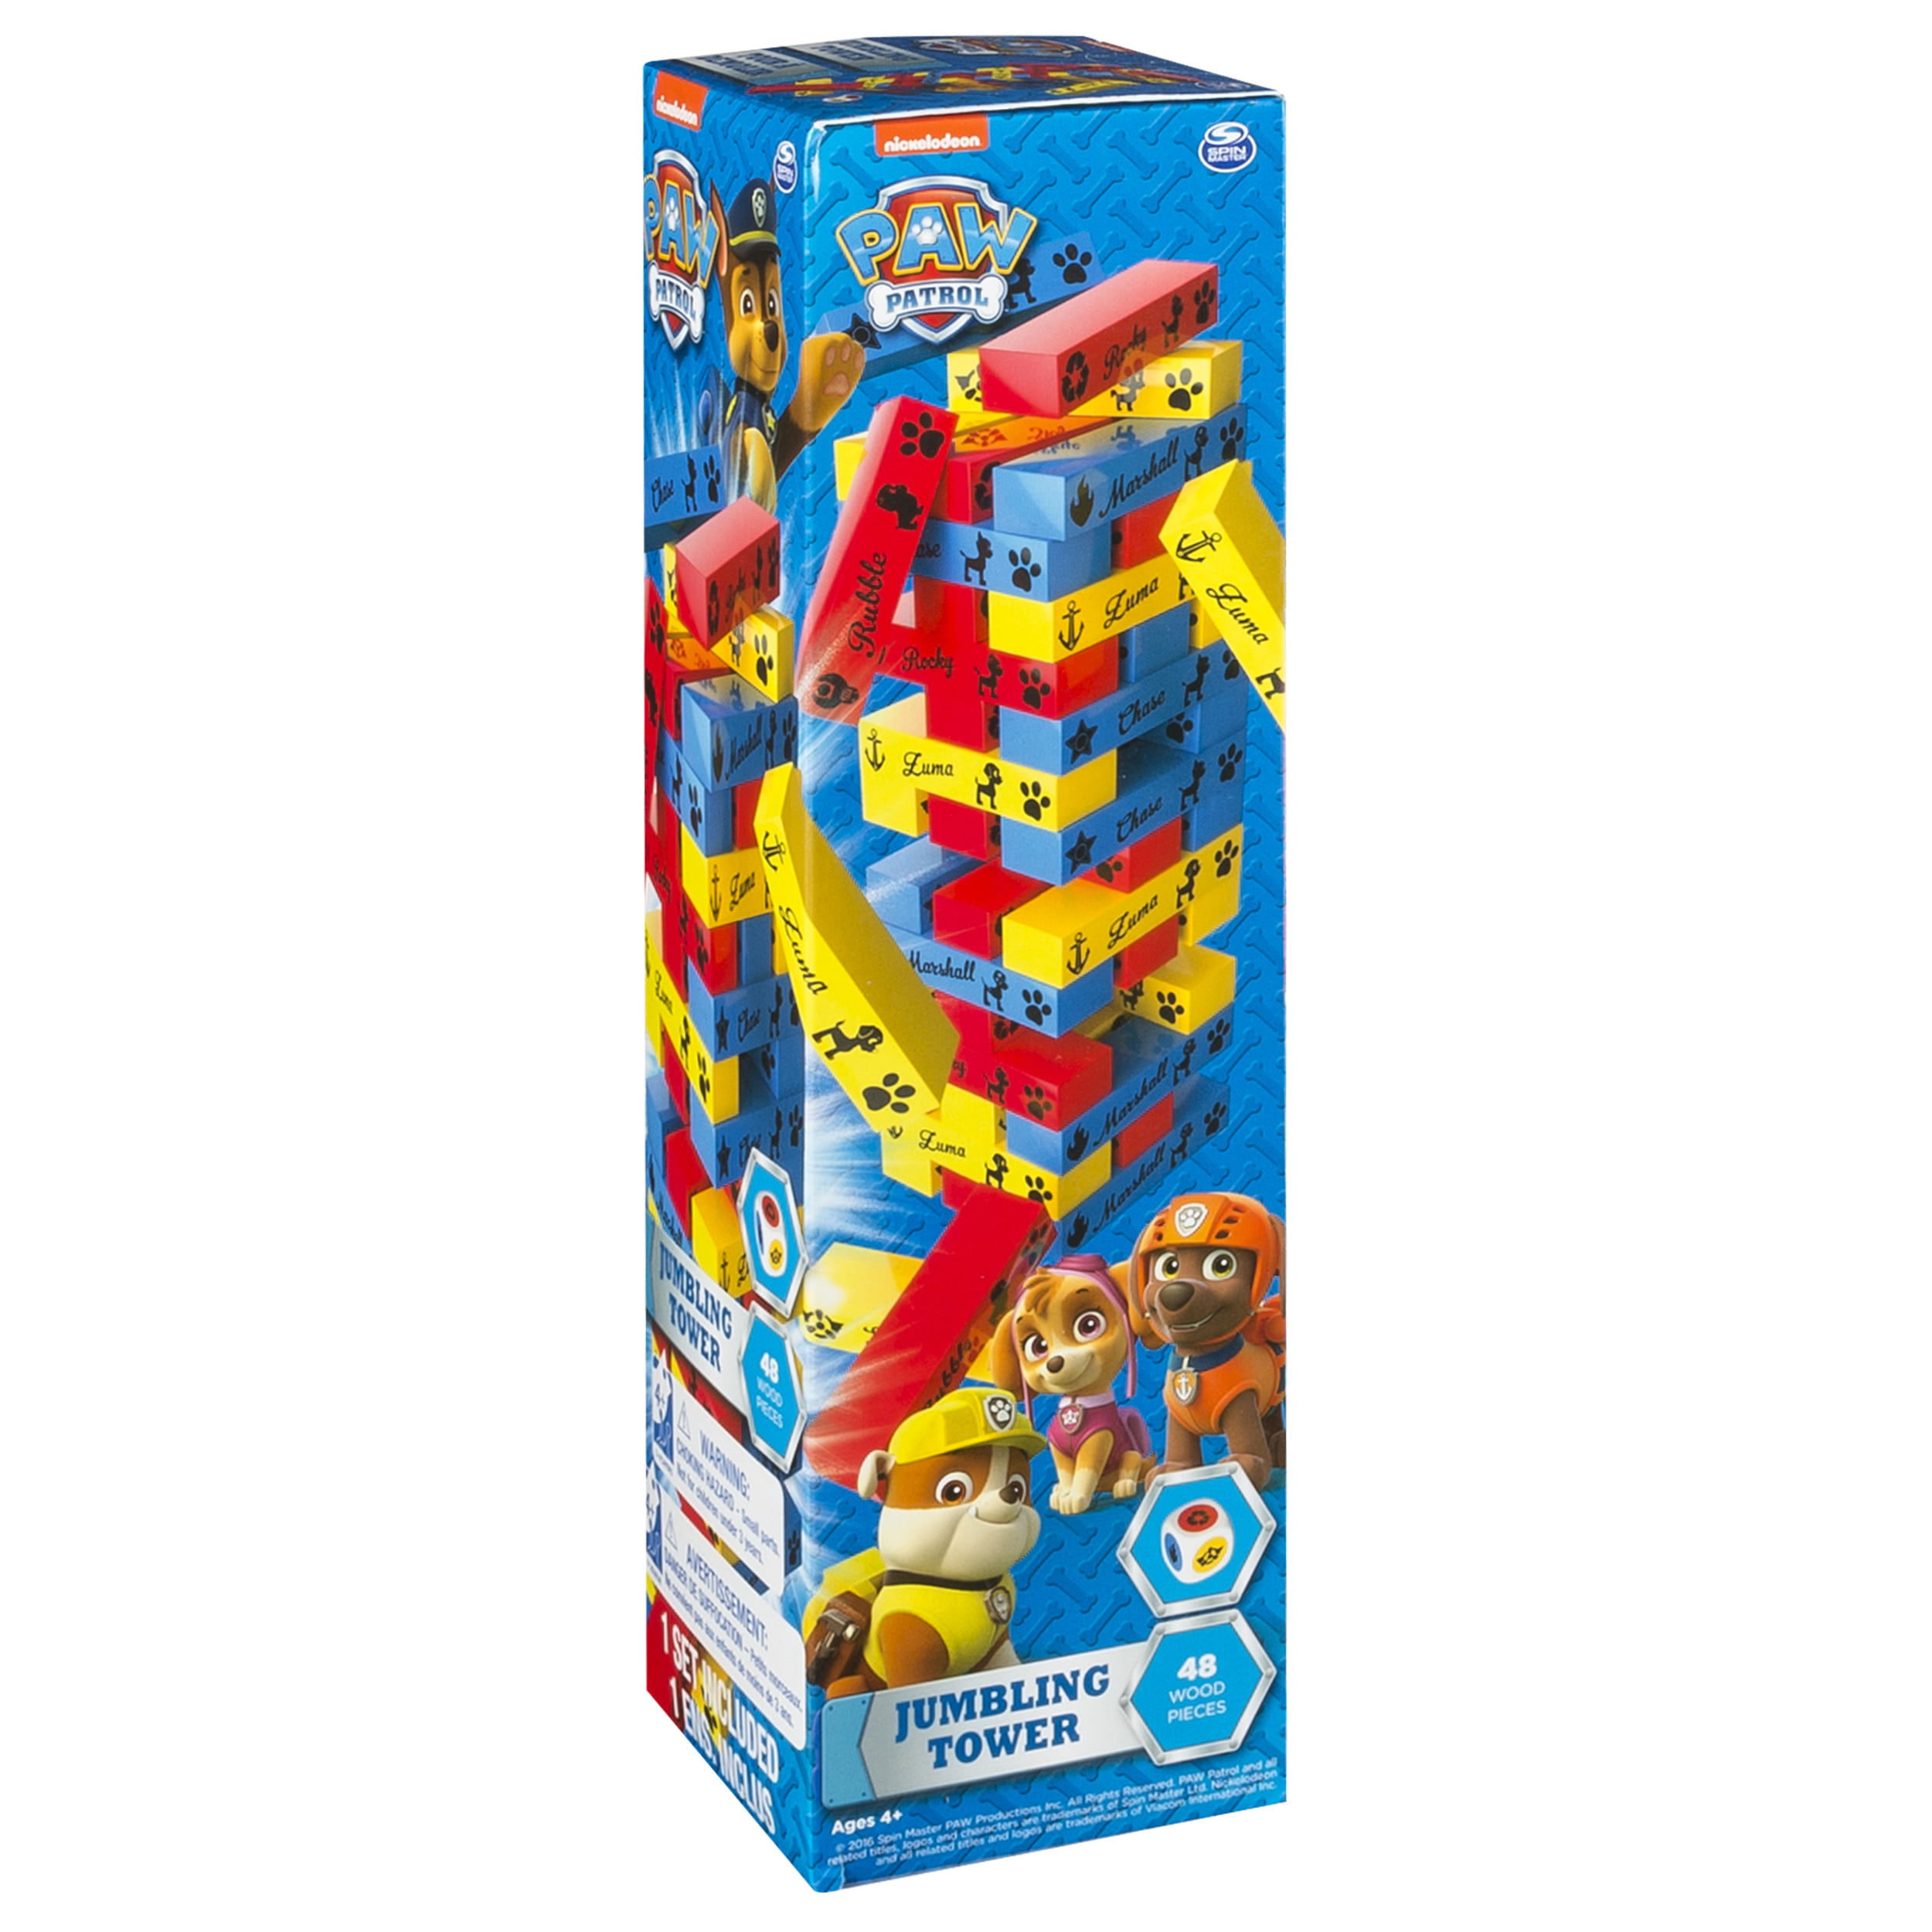 Paw Patrol Nickelodeon Jumbling Tower Game 48 Pcs Spin Master Ages 4 for sale online 